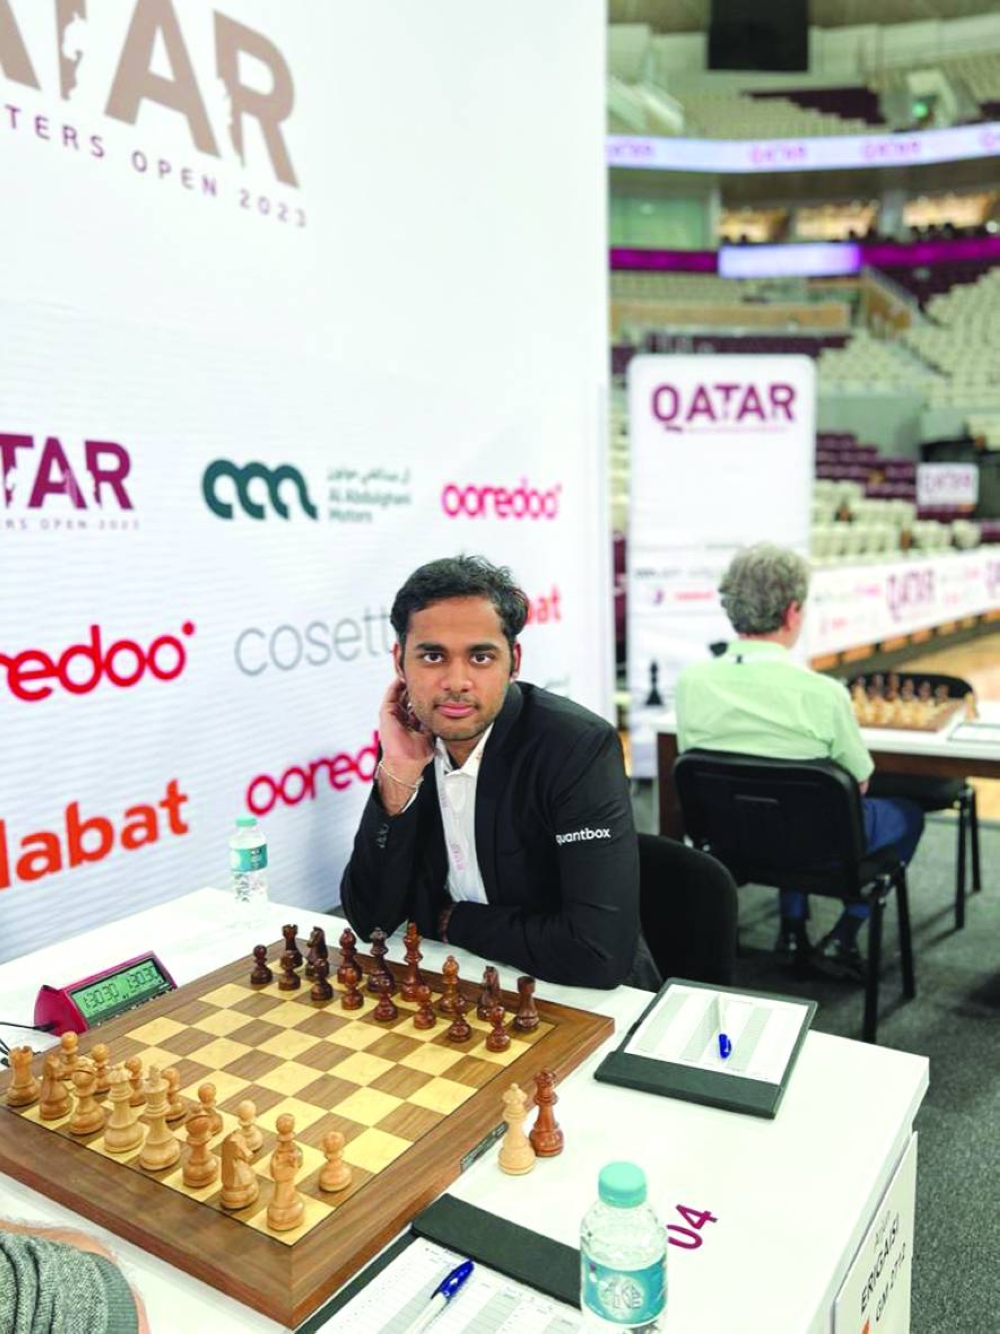 chess24.com on X: Muthaiah AL resigns, as it's mate-in-3, and Carlsen  moves to a more respectable 2/3!  #QatarMasters2023   / X